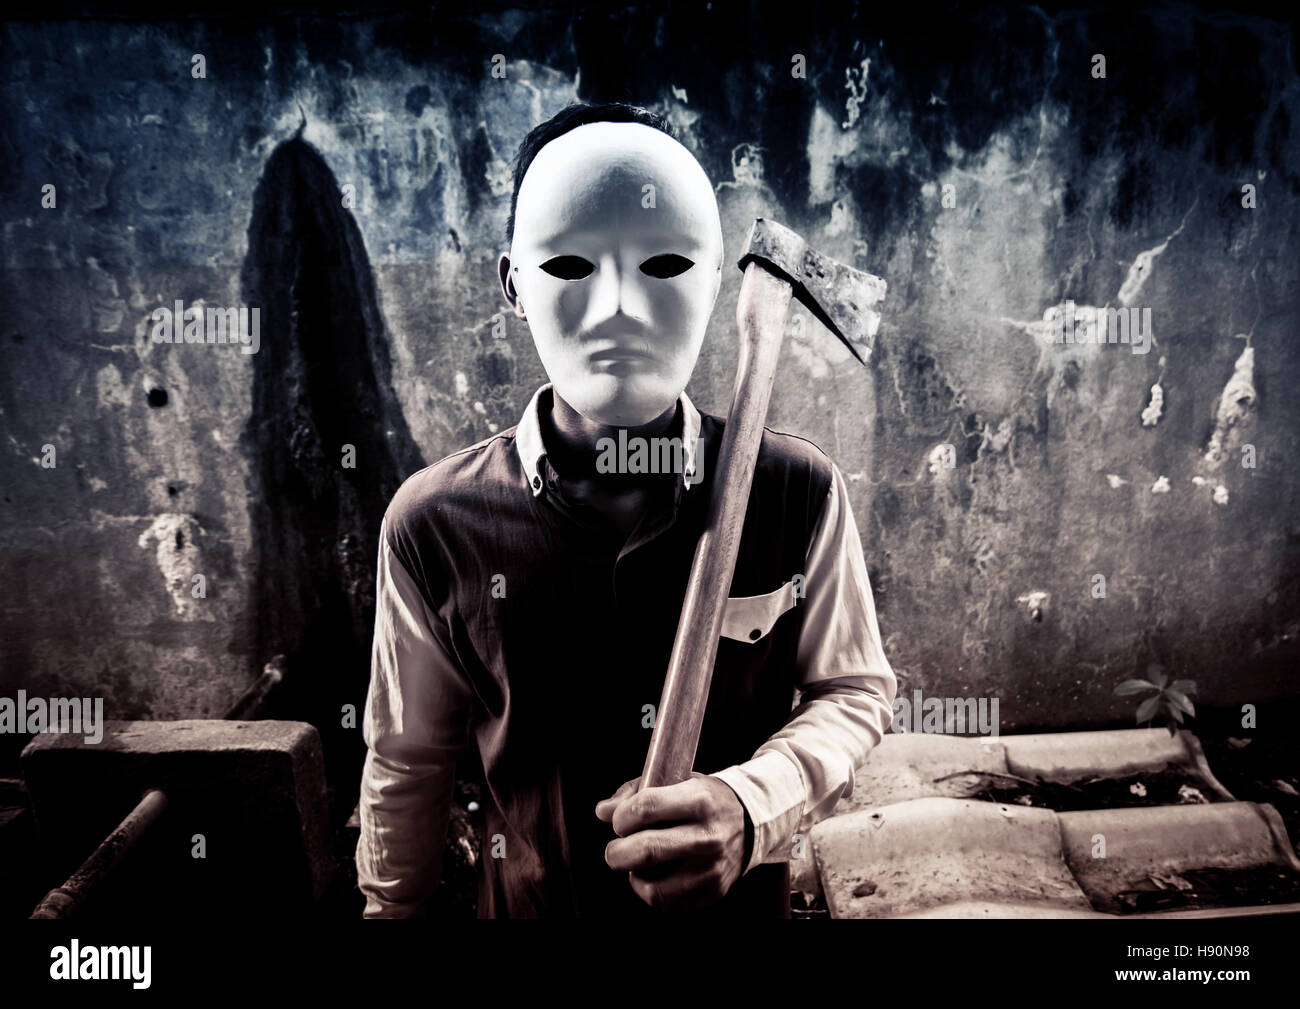 A stranger person with hatchet ,Scary background for book cover ideas Stock Photo